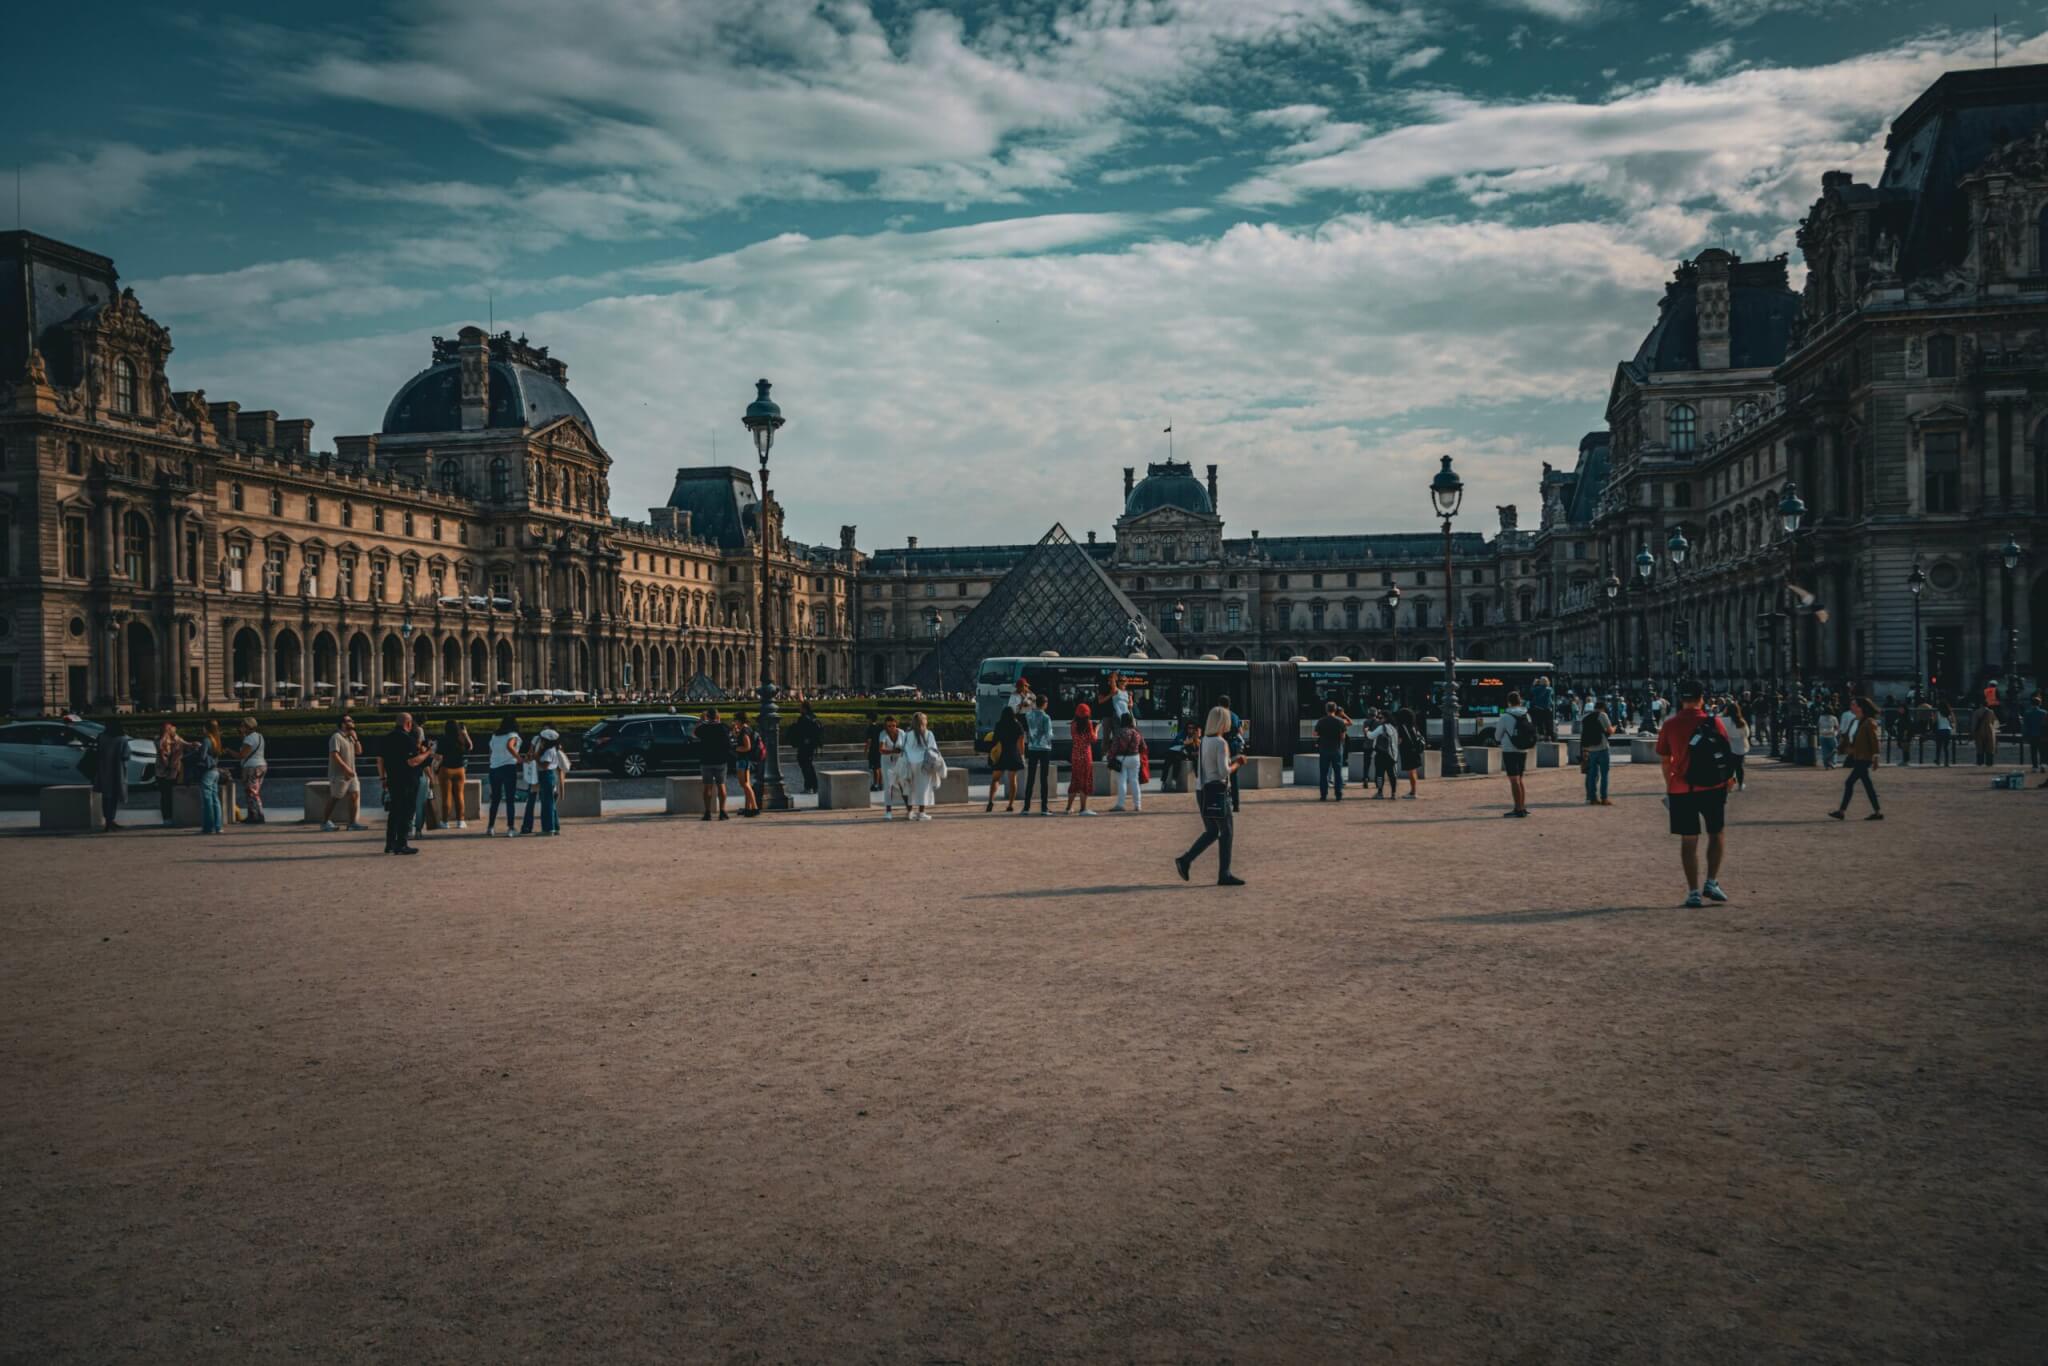 People walking on square near louvre museum